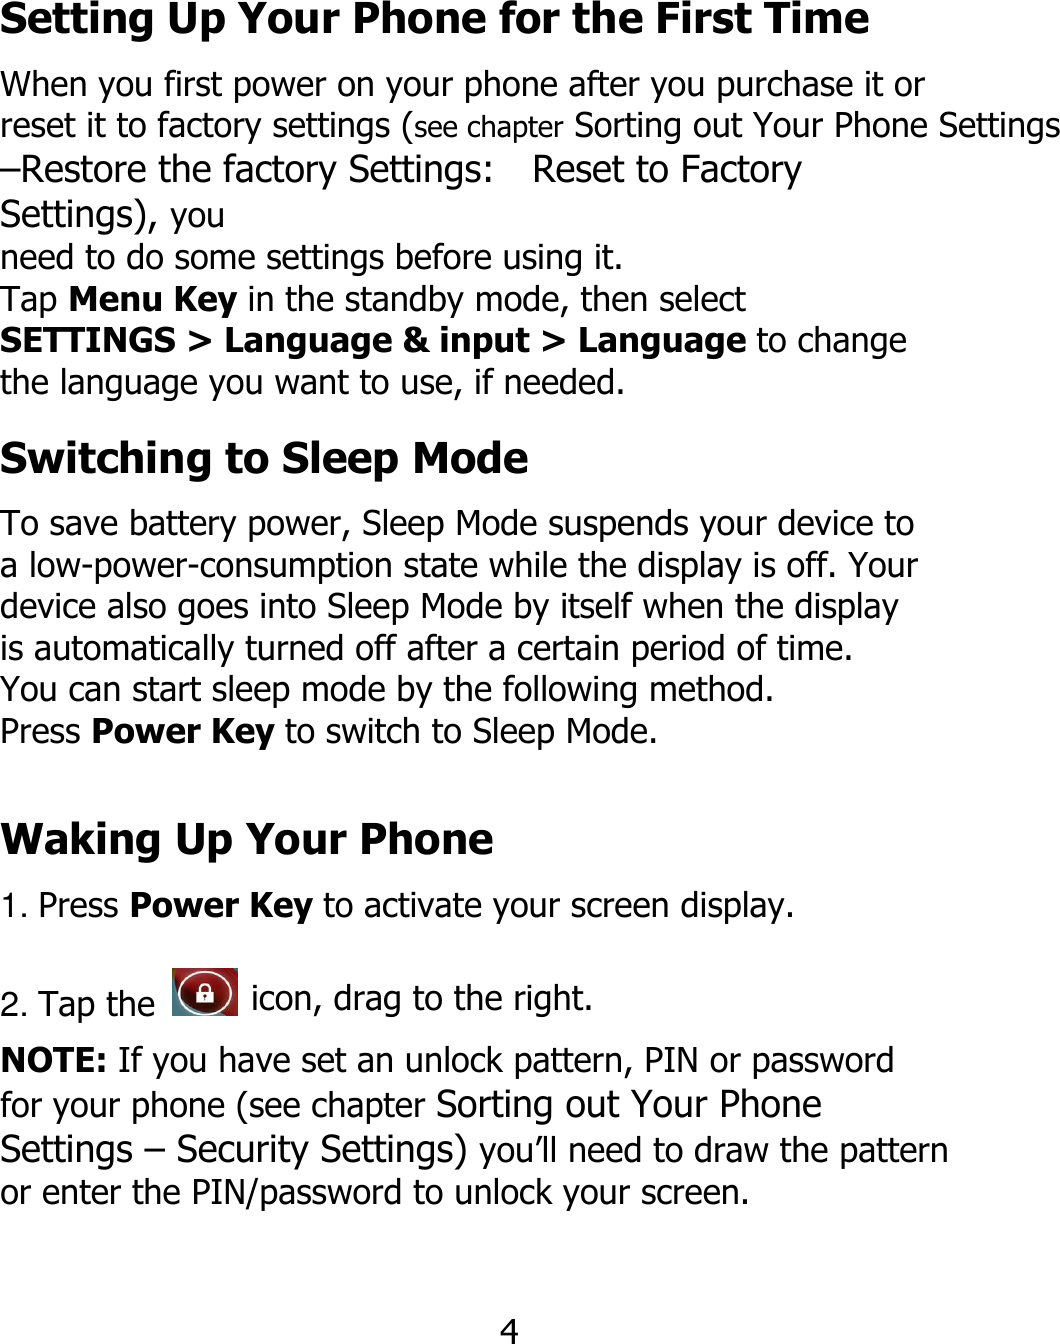 Setting Up Your Phone for the First Time When you first power on your phone after you purchase it or reset it to factory settings (see chapter Sorting out Your Phone Settings –Restore the factory Settings:    Reset to Factory   Settings), you need to do some settings before using it. Tap Menu Key in the standby mode, then select SETTINGS &gt; Language &amp; input &gt; Language to change the language you want to use, if needed. Switching to Sleep Mode To save battery power, Sleep Mode suspends your device to a low-power-consumption state while the display is off. Your device also goes into Sleep Mode by itself when the display is automatically turned off after a certain period of time. You can start sleep mode by the following method. Press Power Key to switch to Sleep Mode. Waking Up Your Phone 1. Press Power Key to activate your screen display. 2. Tap the   icon, drag to the right. NOTE: If you have set an unlock pattern, PIN or password for your phone (see chapter Sorting out Your Phone Settings – Security Settings) you’ll need to draw the pattern or enter the PIN/password to unlock your screen. 4 